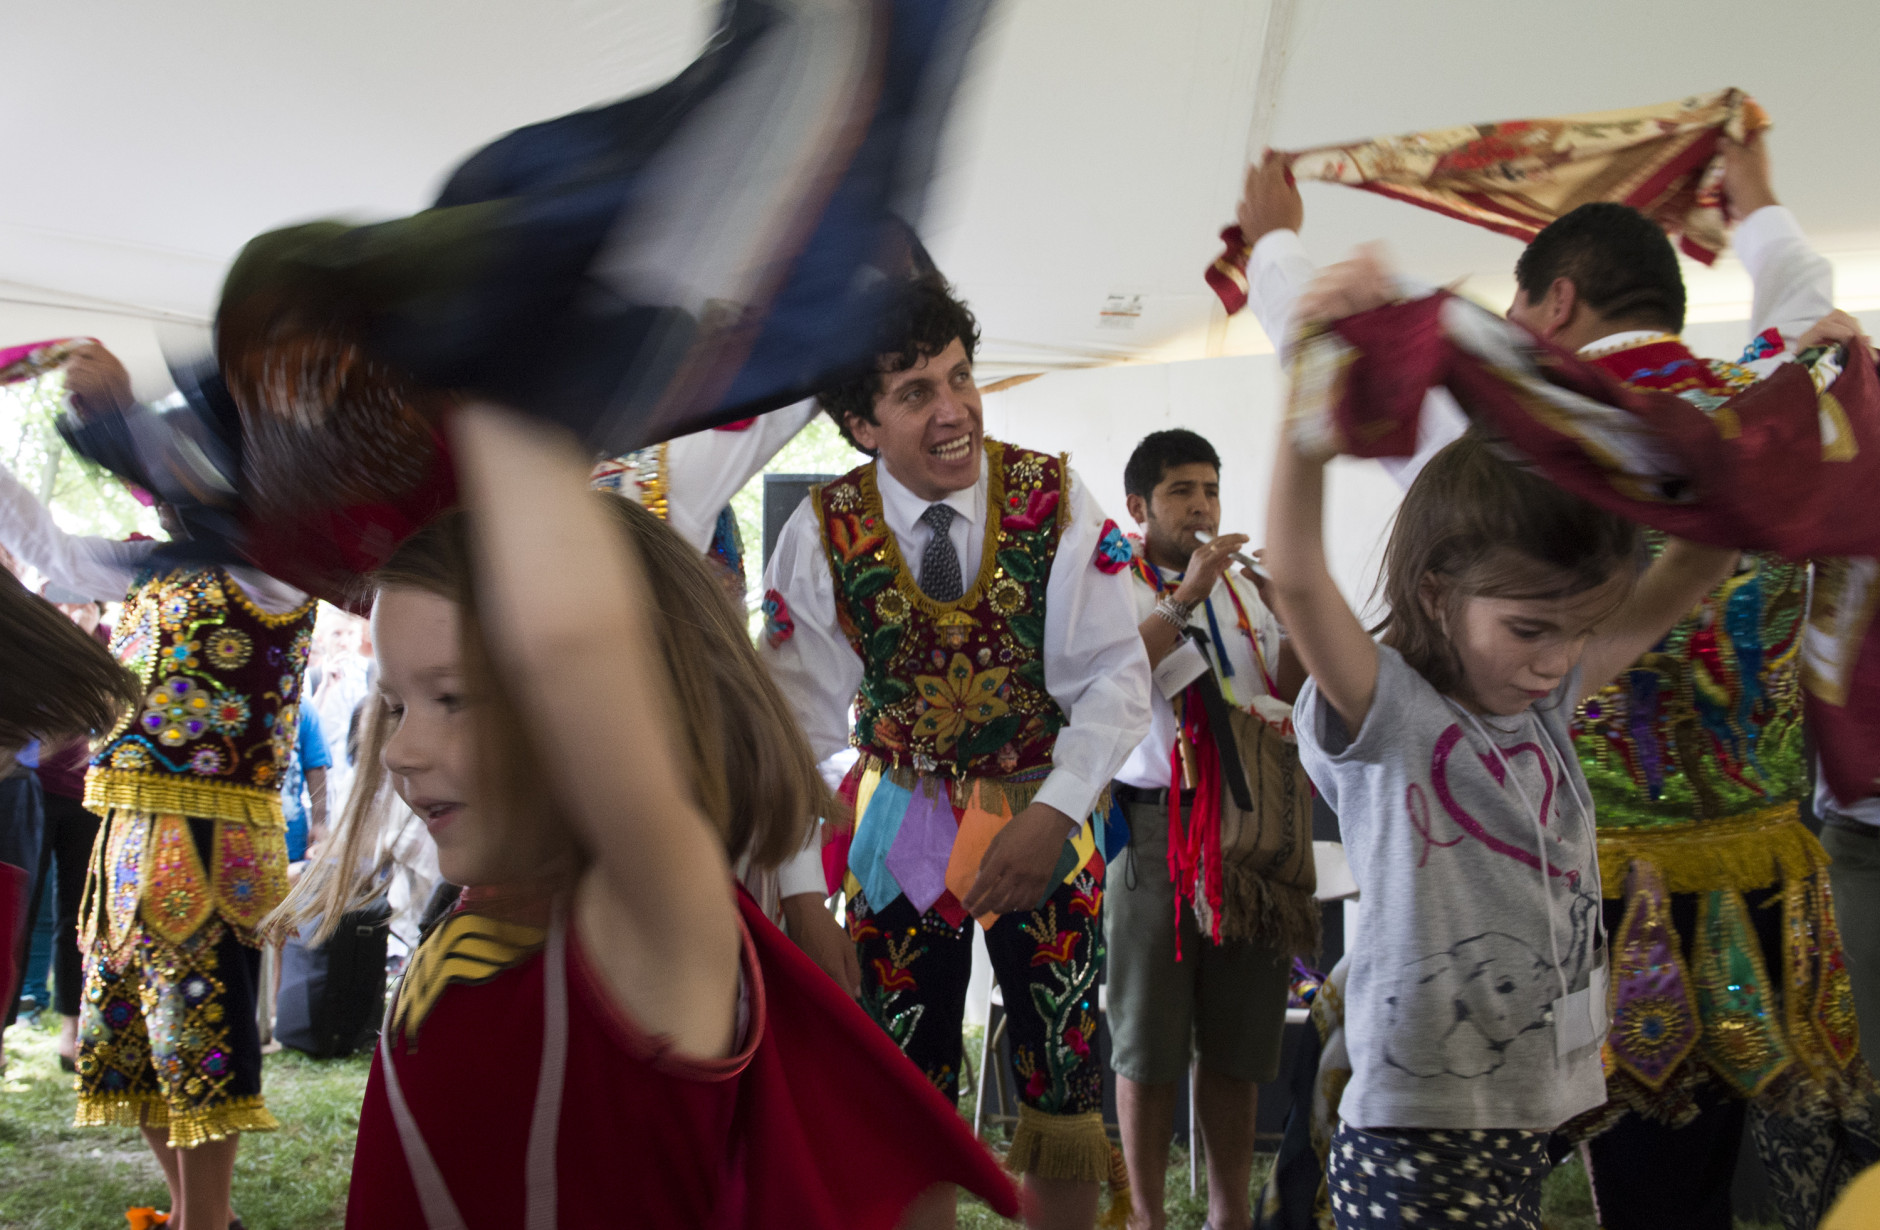 Children learn a Peruvian dance at the Smithsonian Folklife Festival in Washington, Wednesday, June 24, 2015. (AP Photo/Molly Riley)